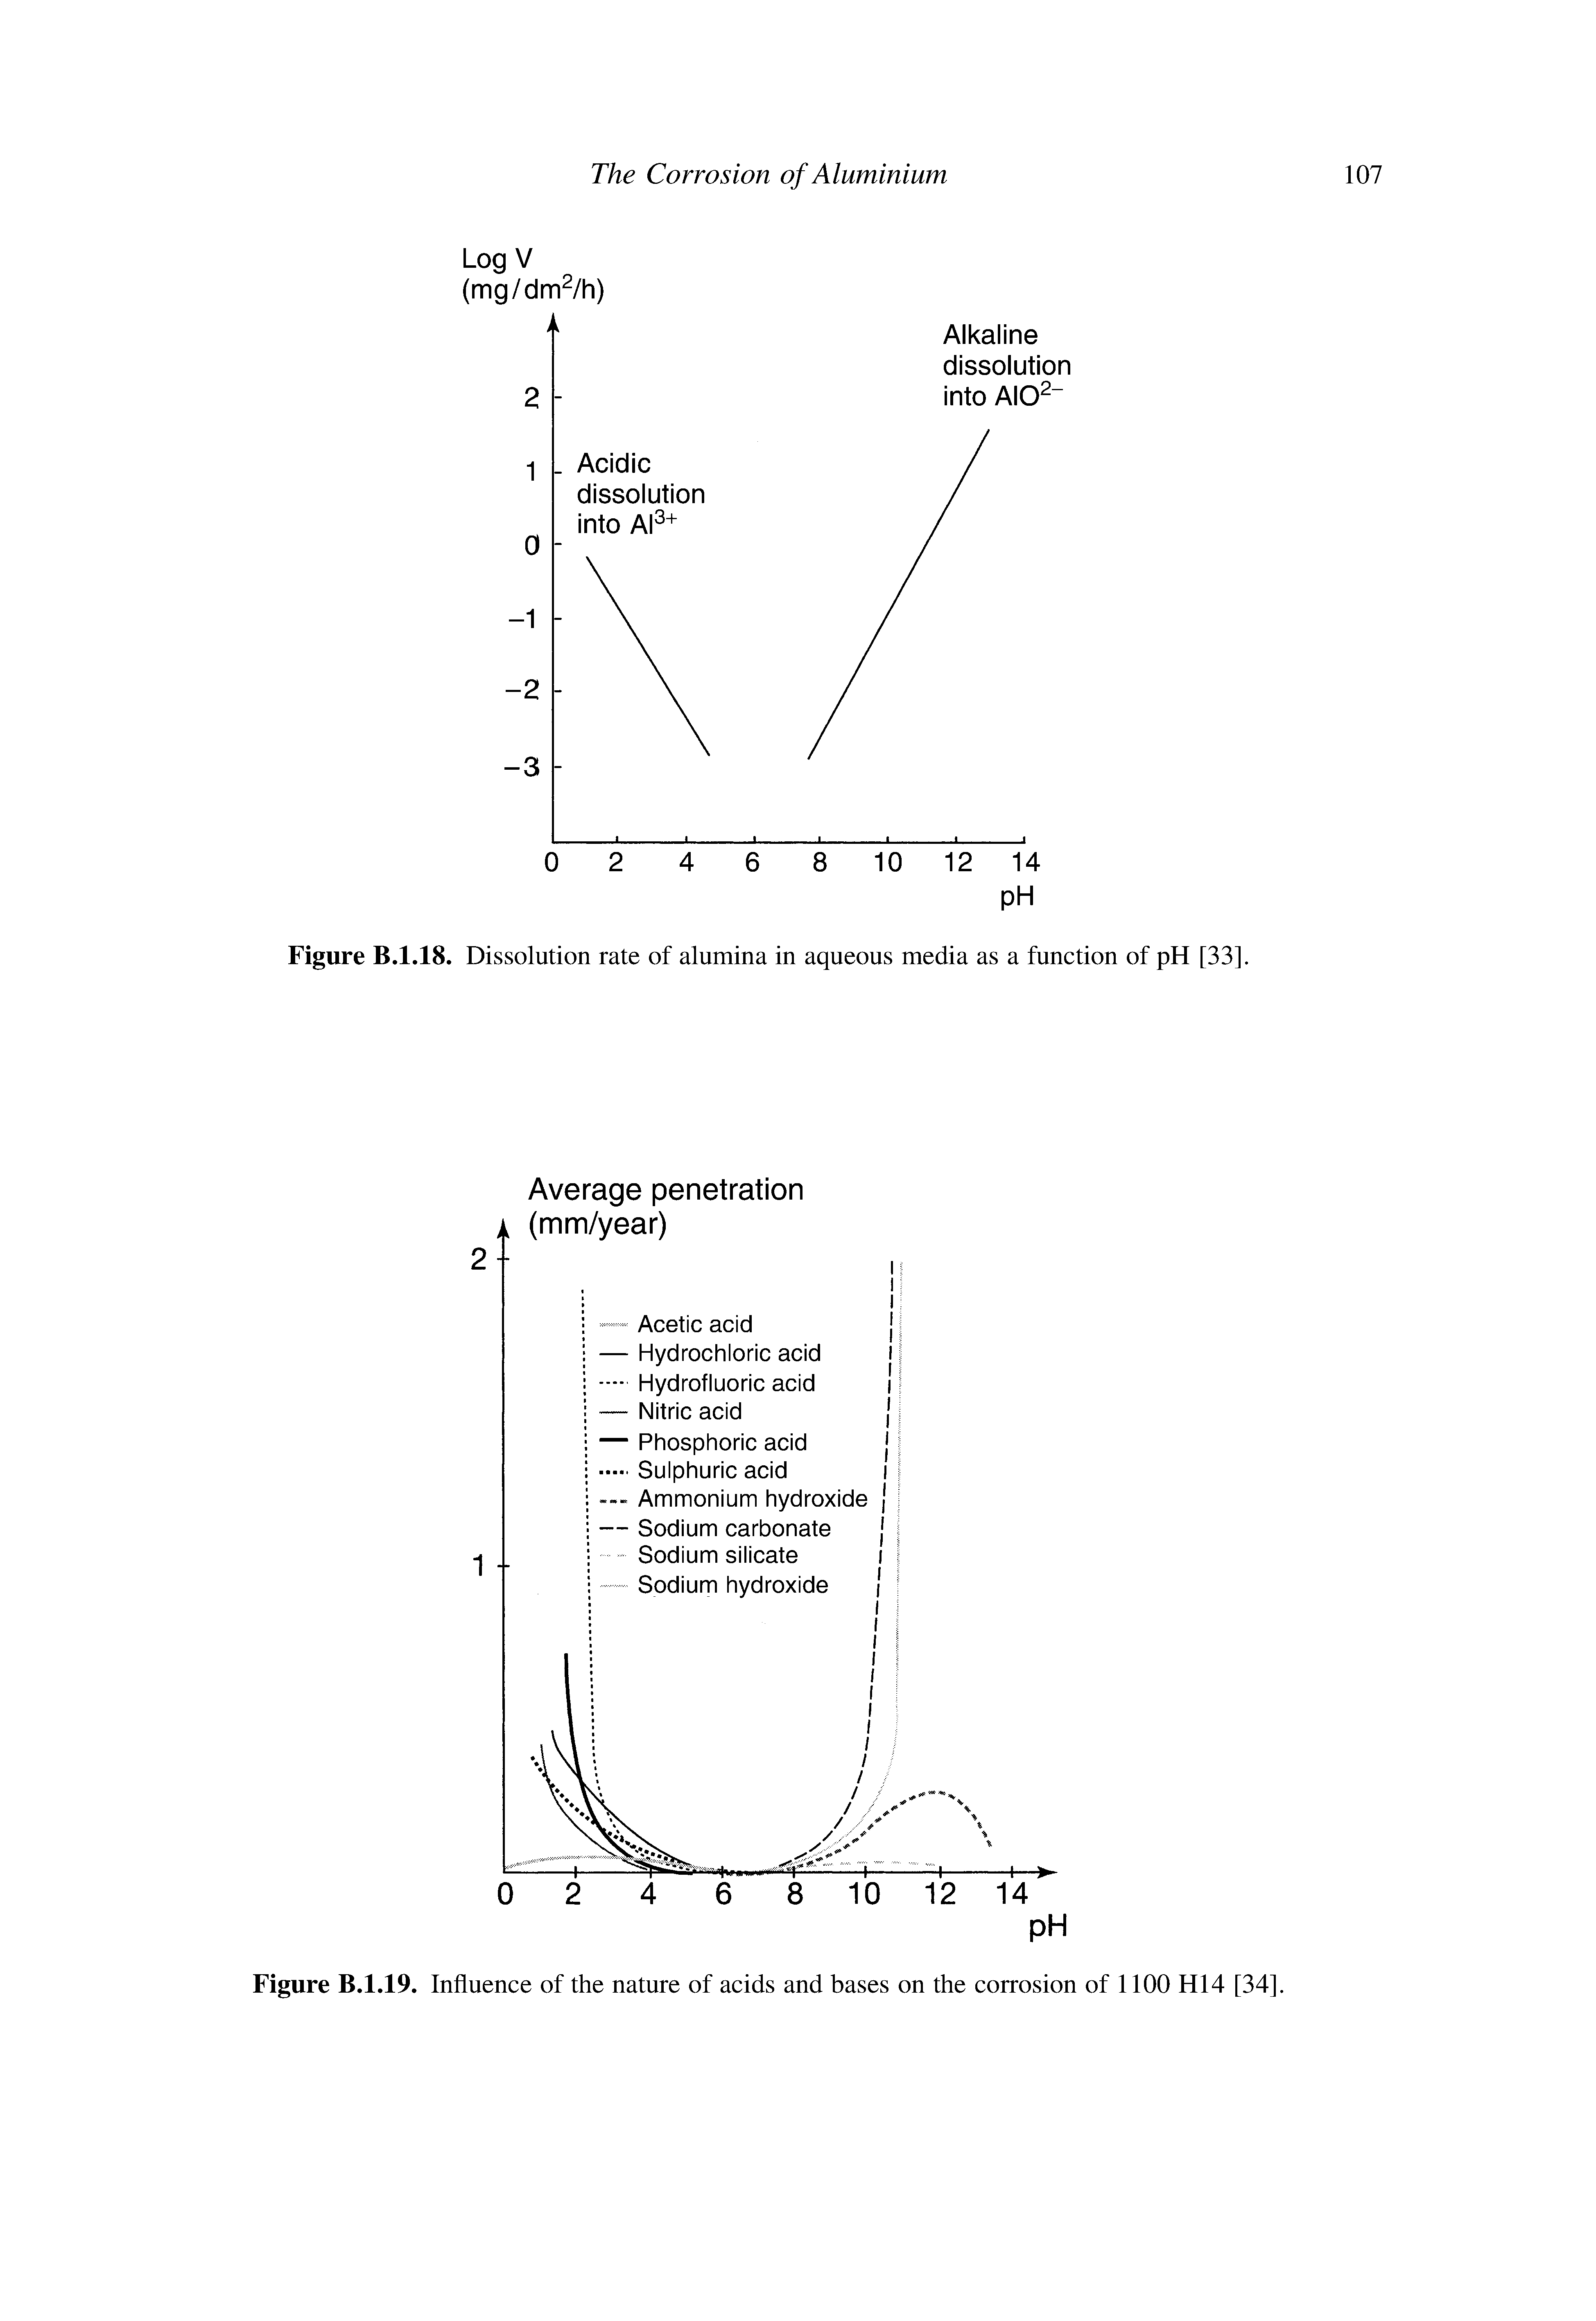 Figure B.1.18. Dissolution rate of alumina in aqueous media as a function of pH [33].